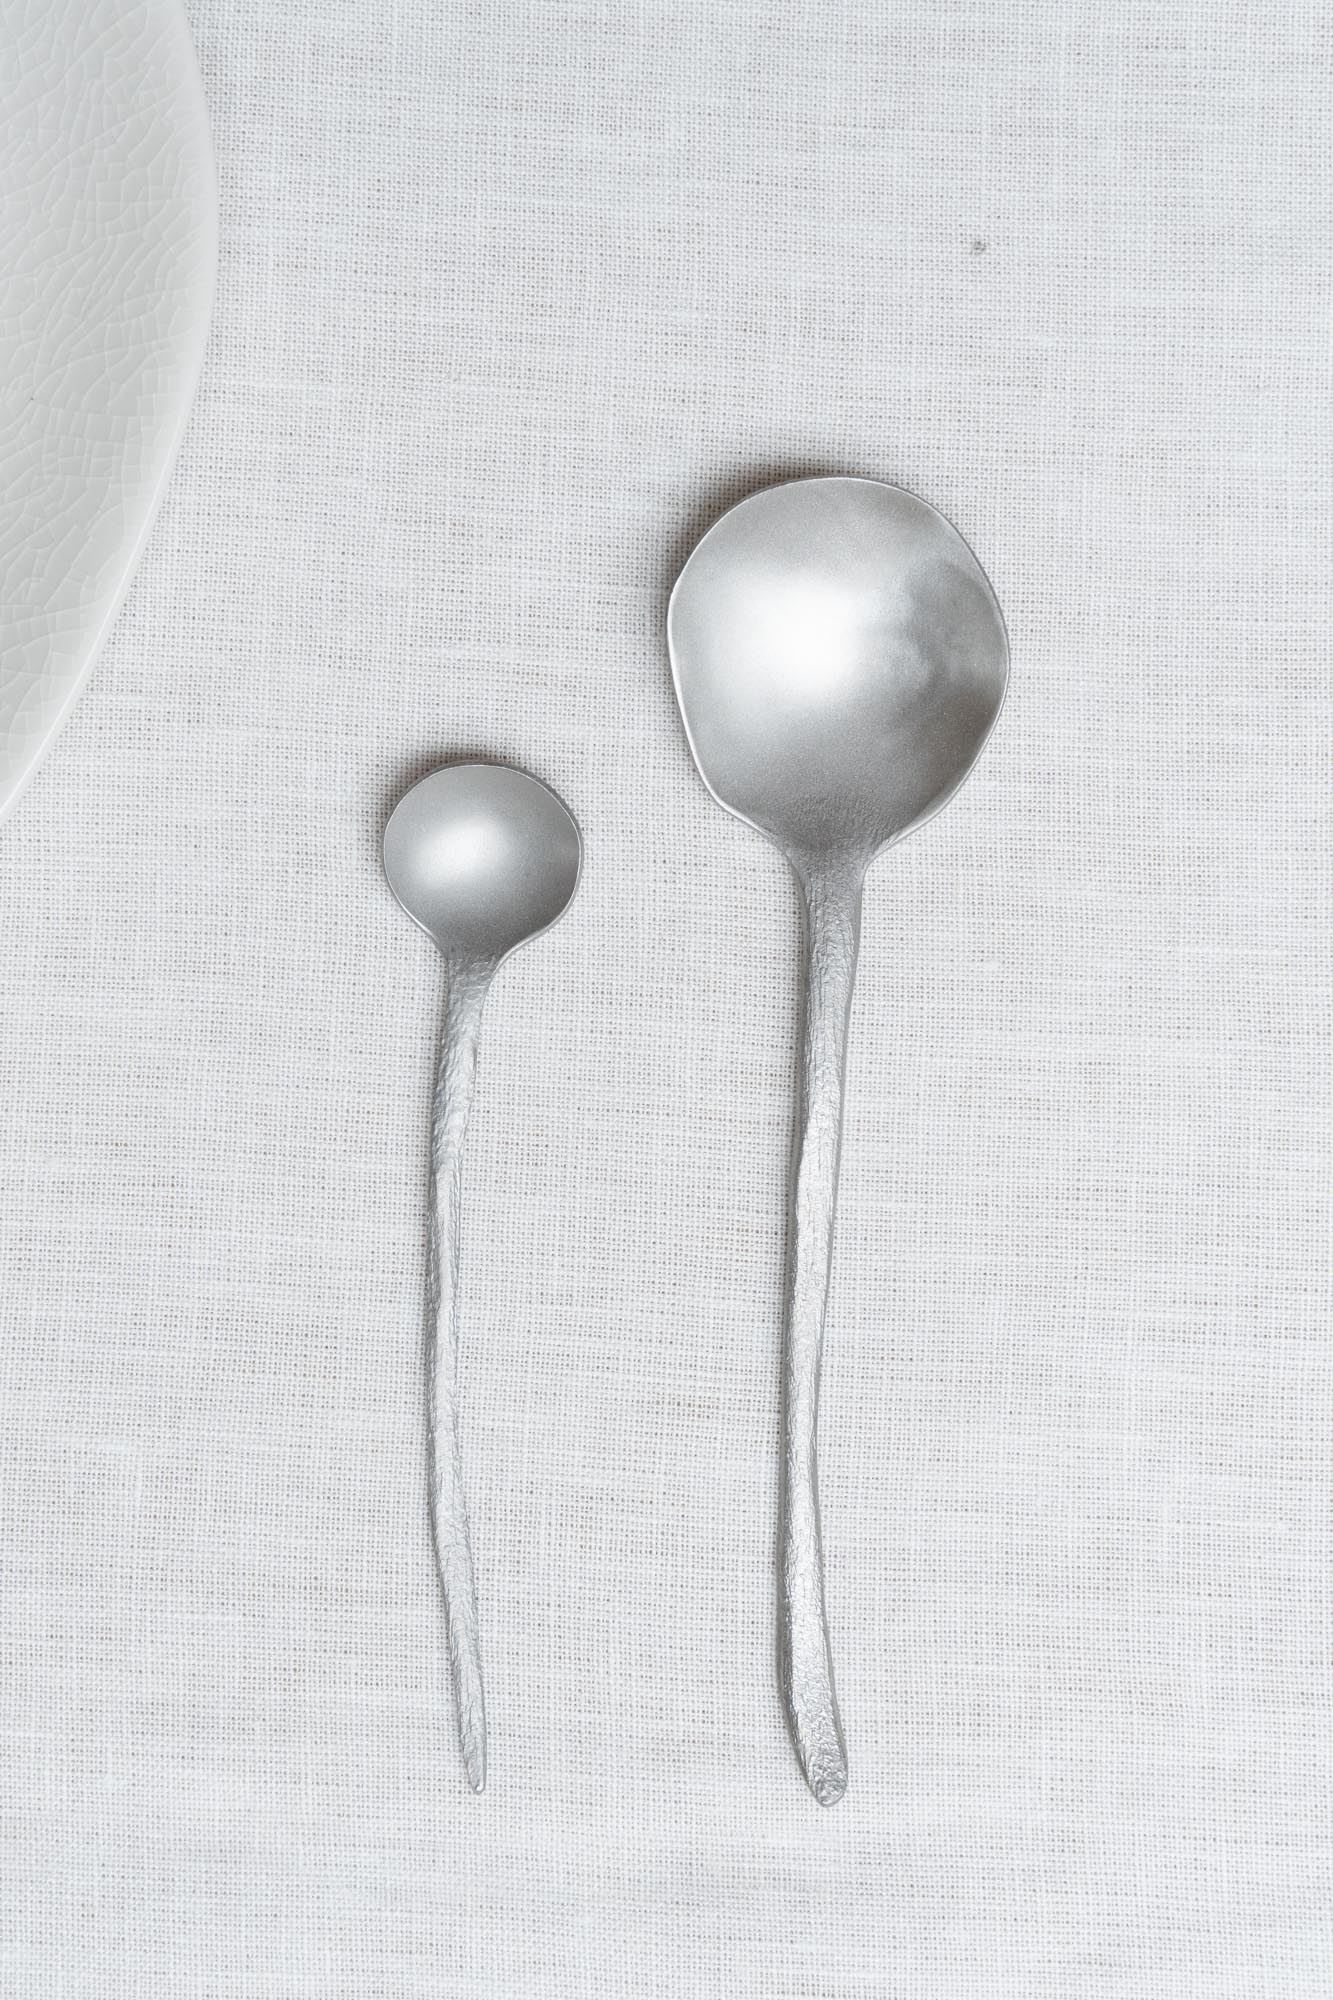 Table Spoon from the Flora Vulgaris Cutlery Collection by Serax.